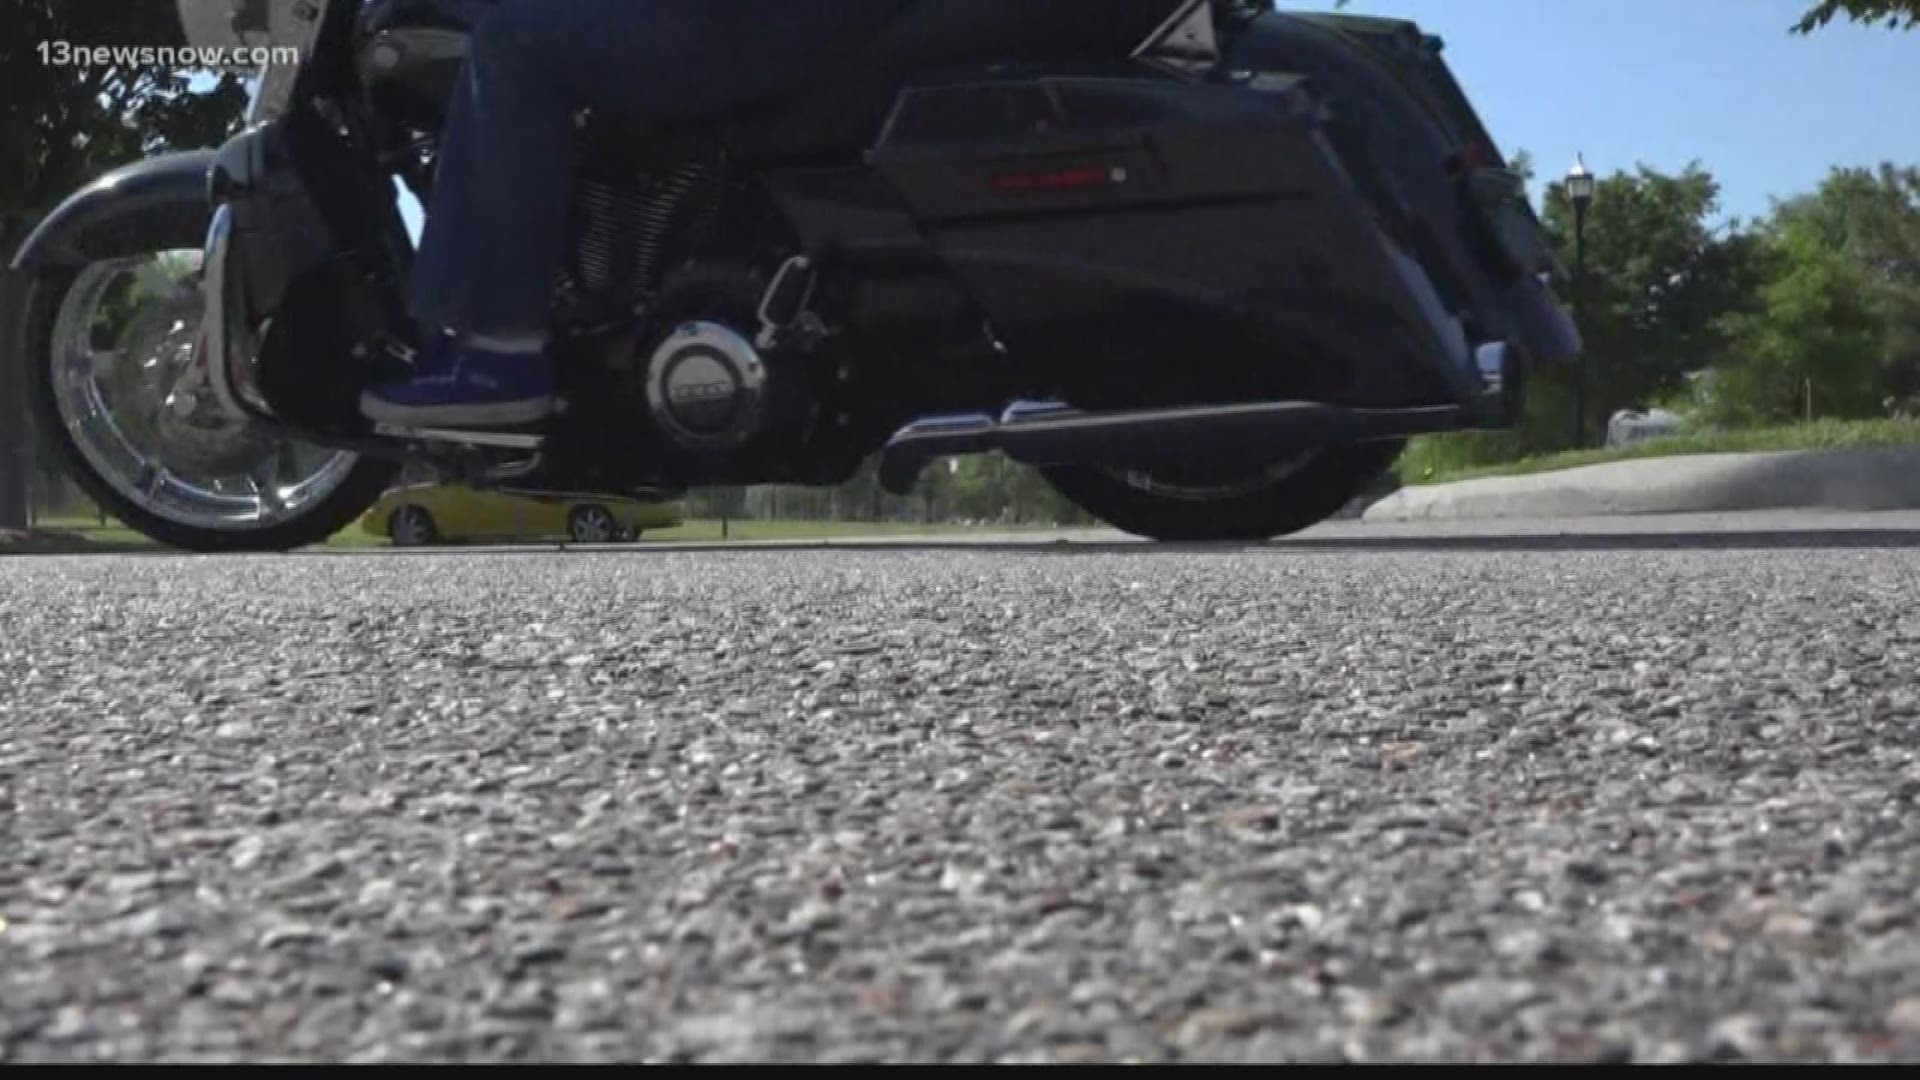 Several motorcycle crashes have turned deadly this summer.